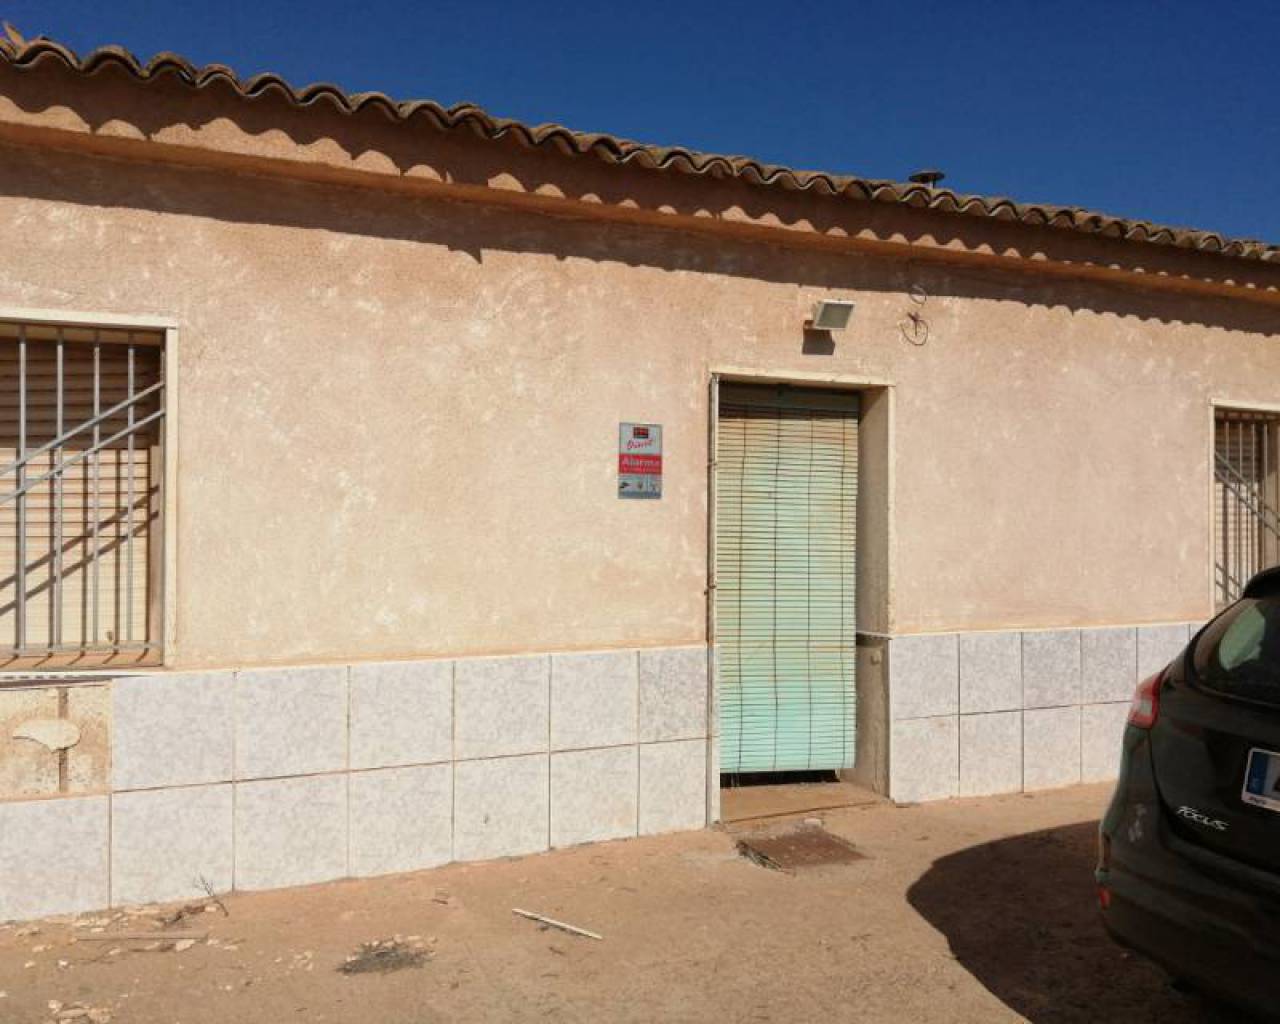 Finca - Country Property - Resale - Torre Pacheco - Torre Pacheco